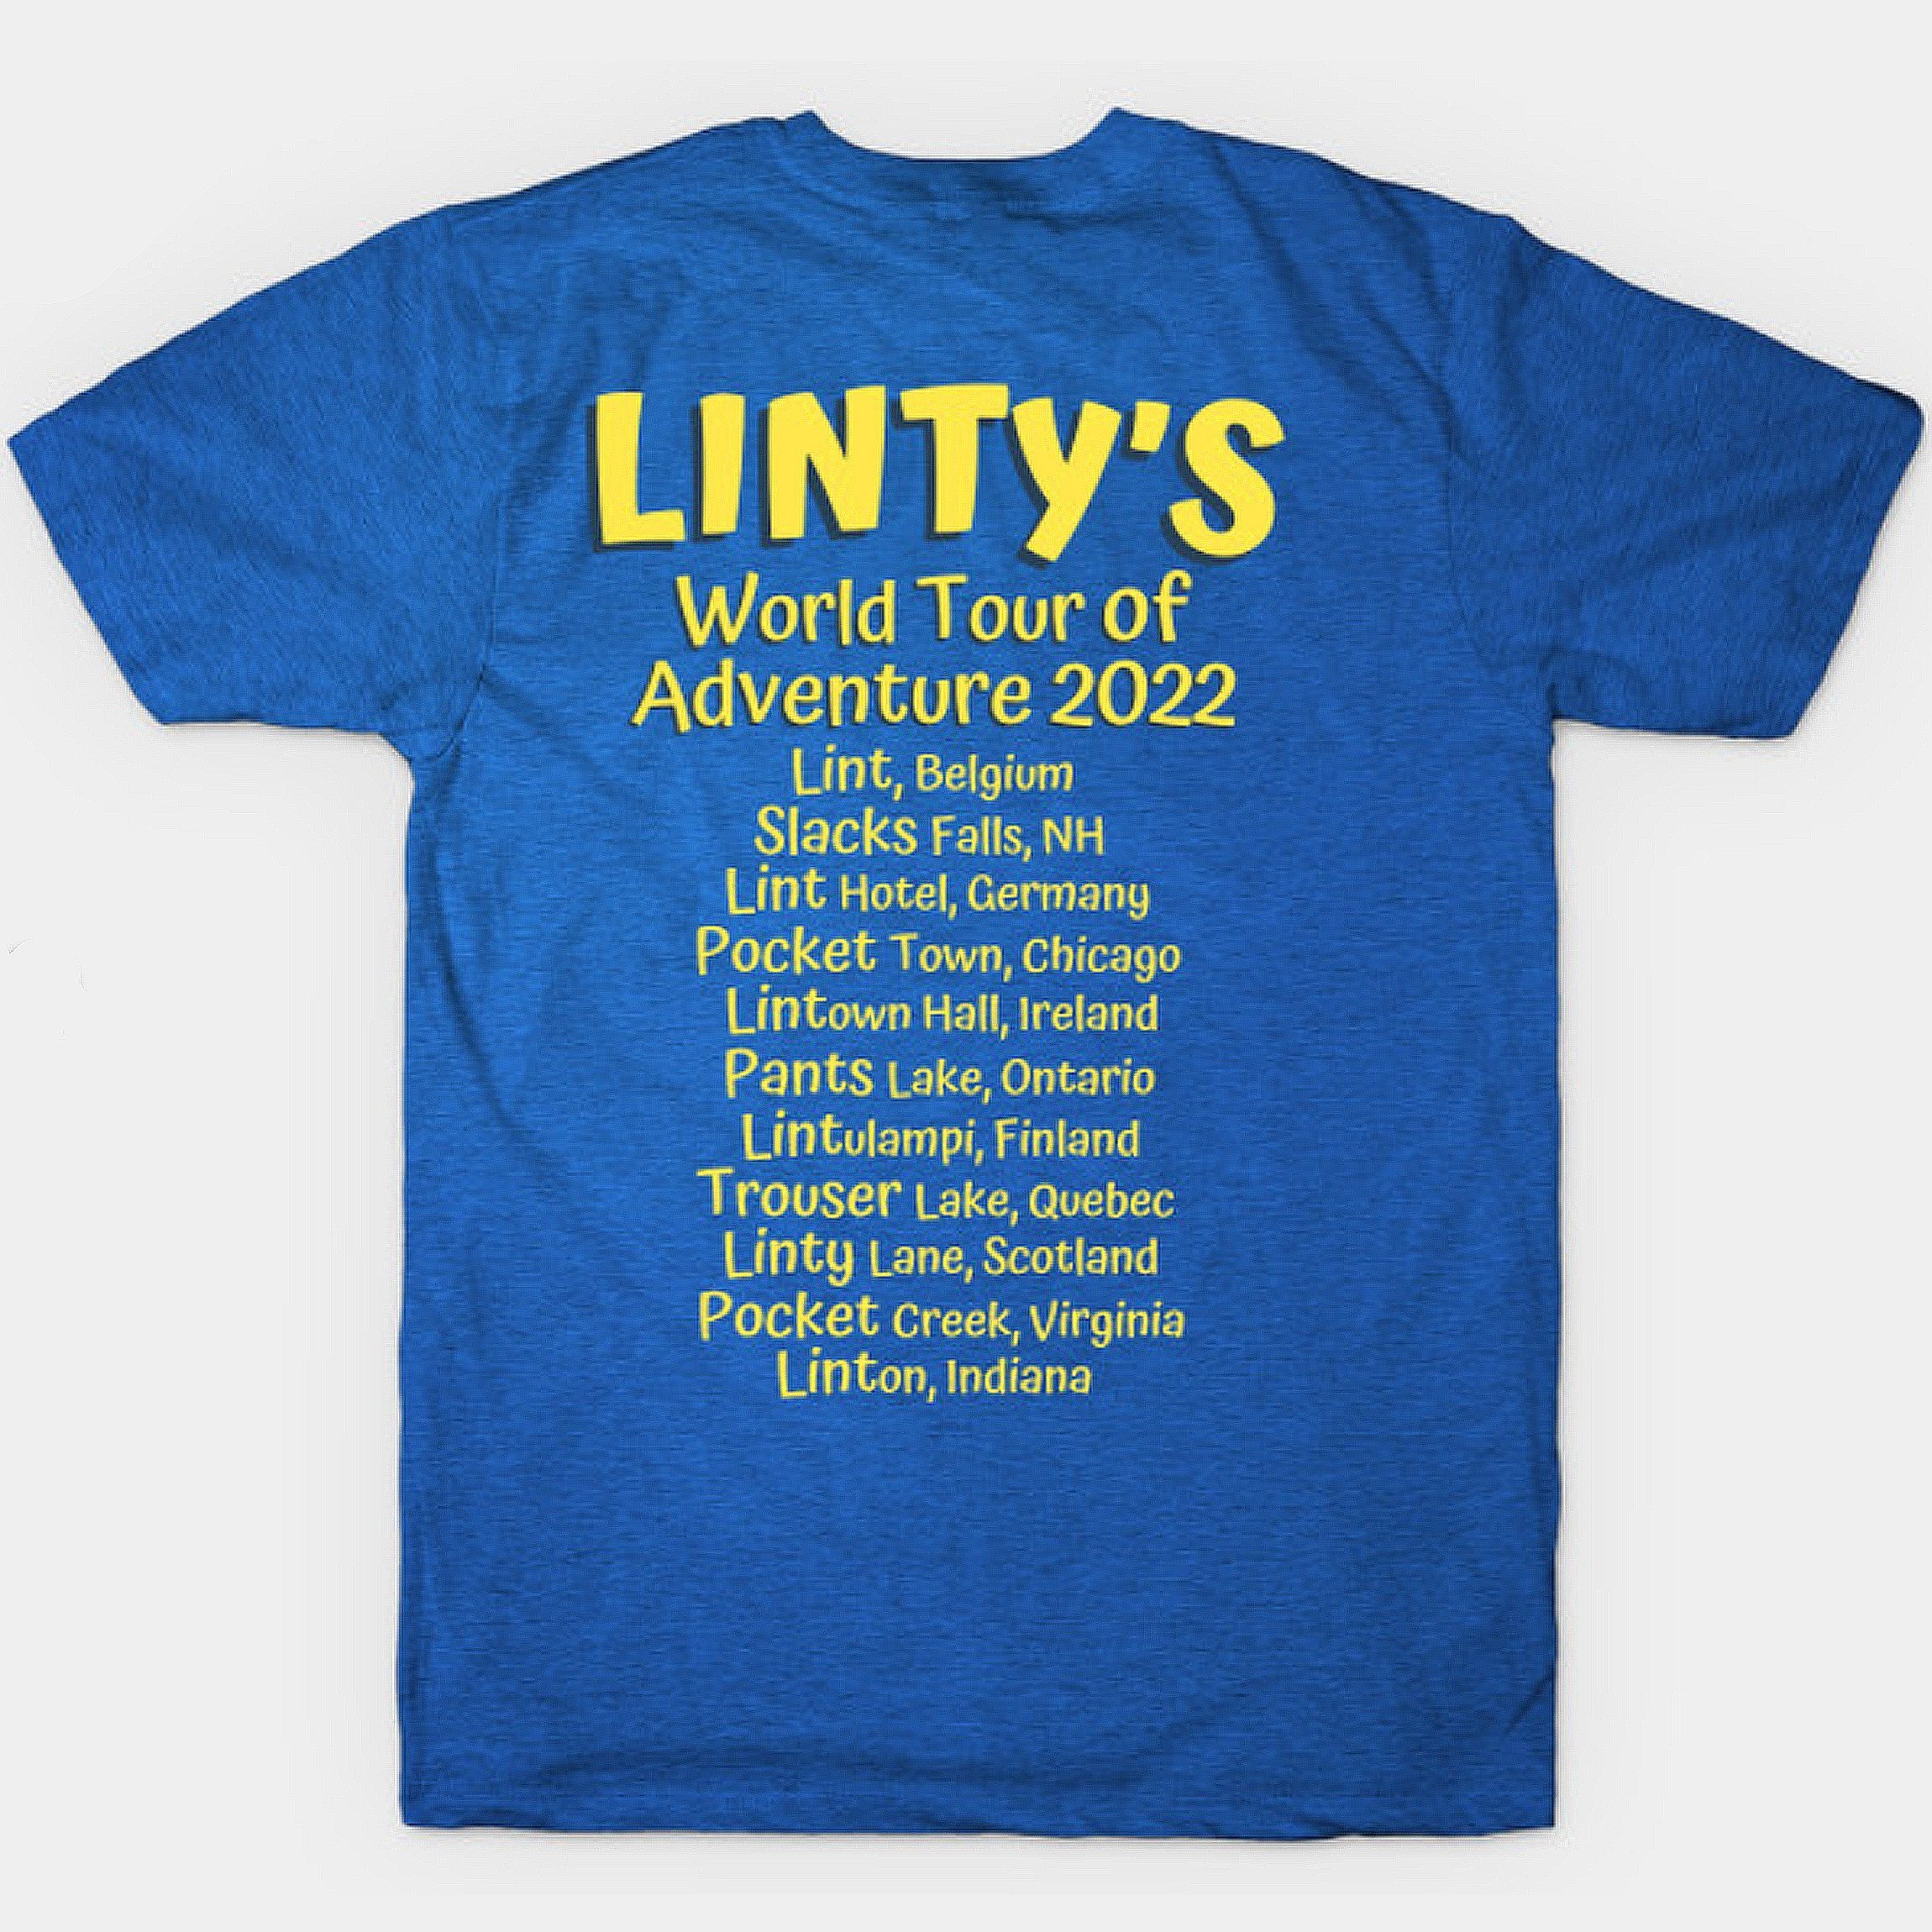 Order your "LINTY World Tour of Adventure 2022" Tee-shirt right here!